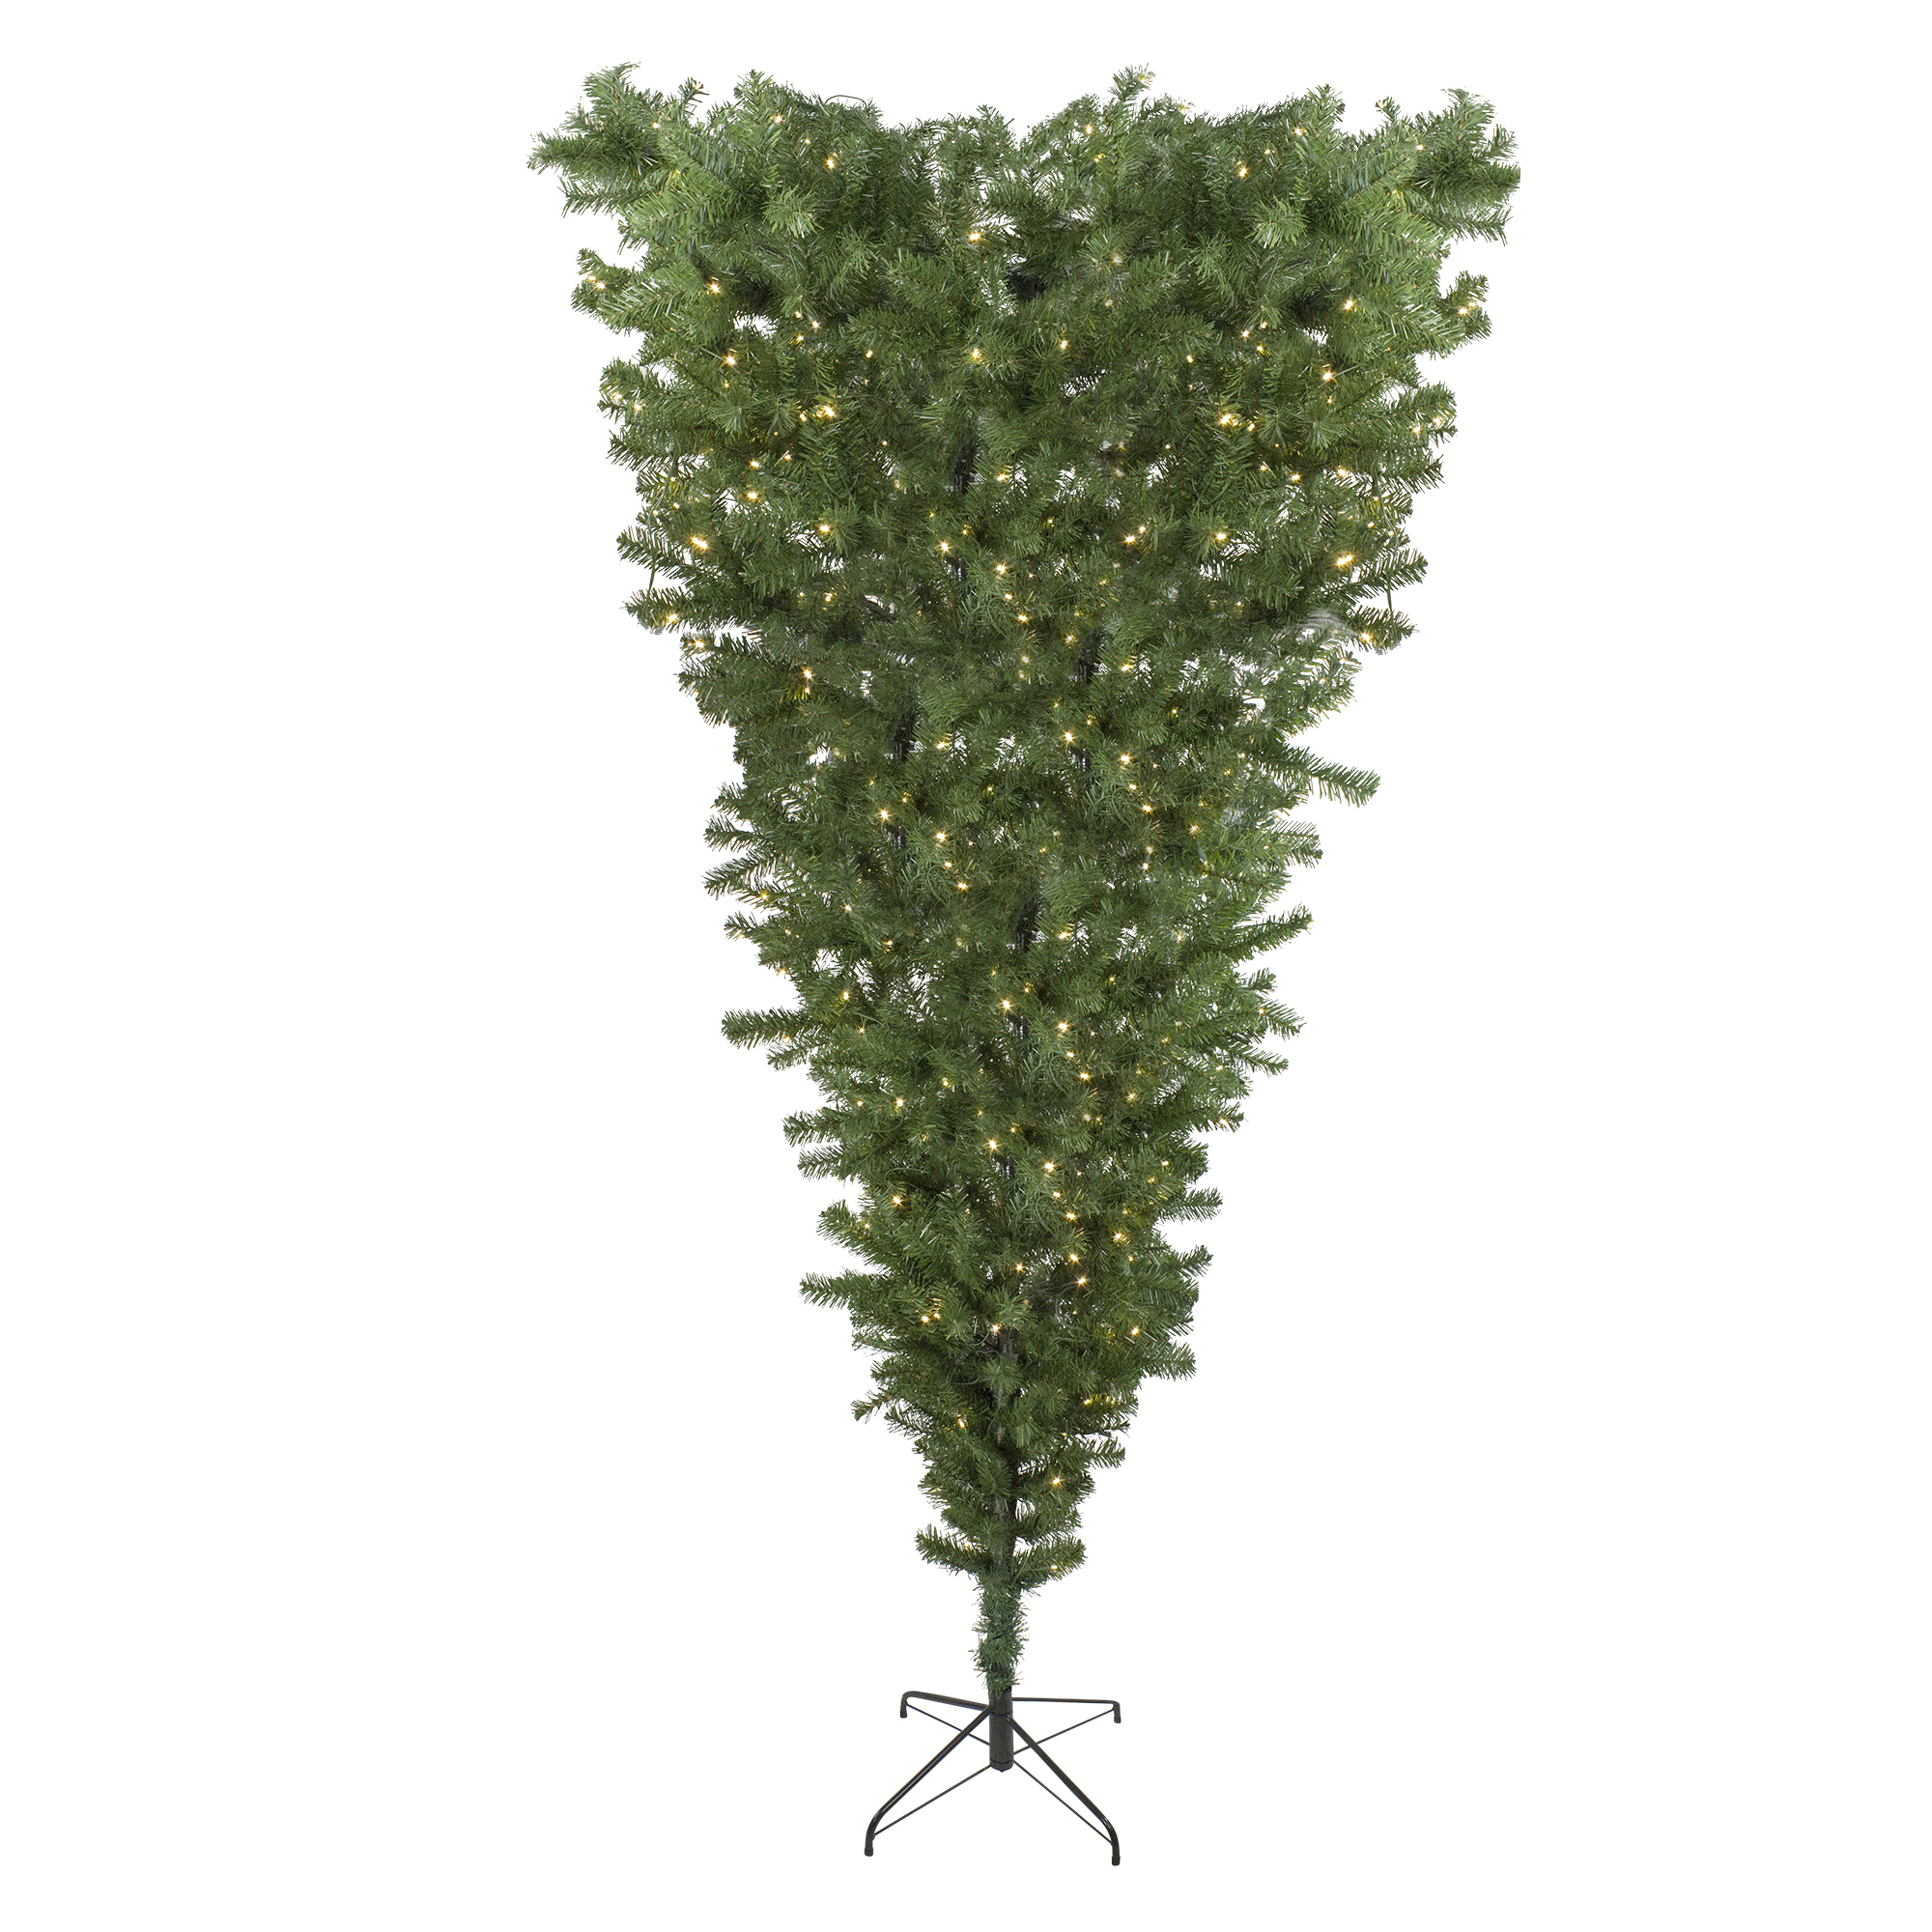 Northlight 7.5' Pre-Lit Green Spruce Artificial Upside Down Christmas Tree - Warm White LED Lights